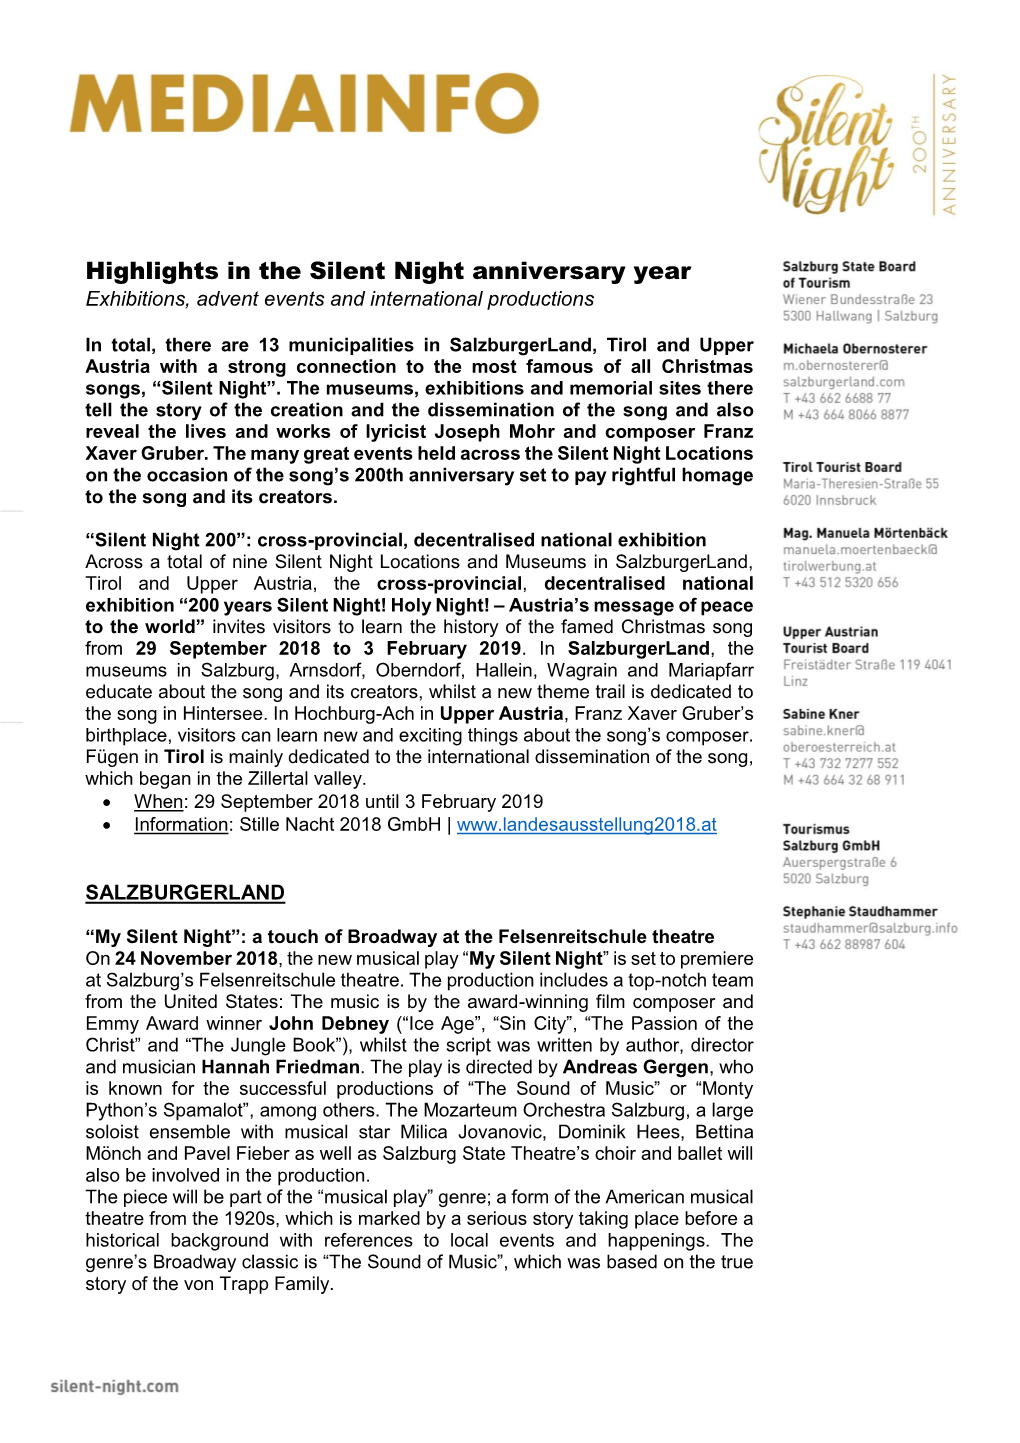 Highlights in the Silent Night Anniversary Year Exhibitions, Advent Events and International Productions